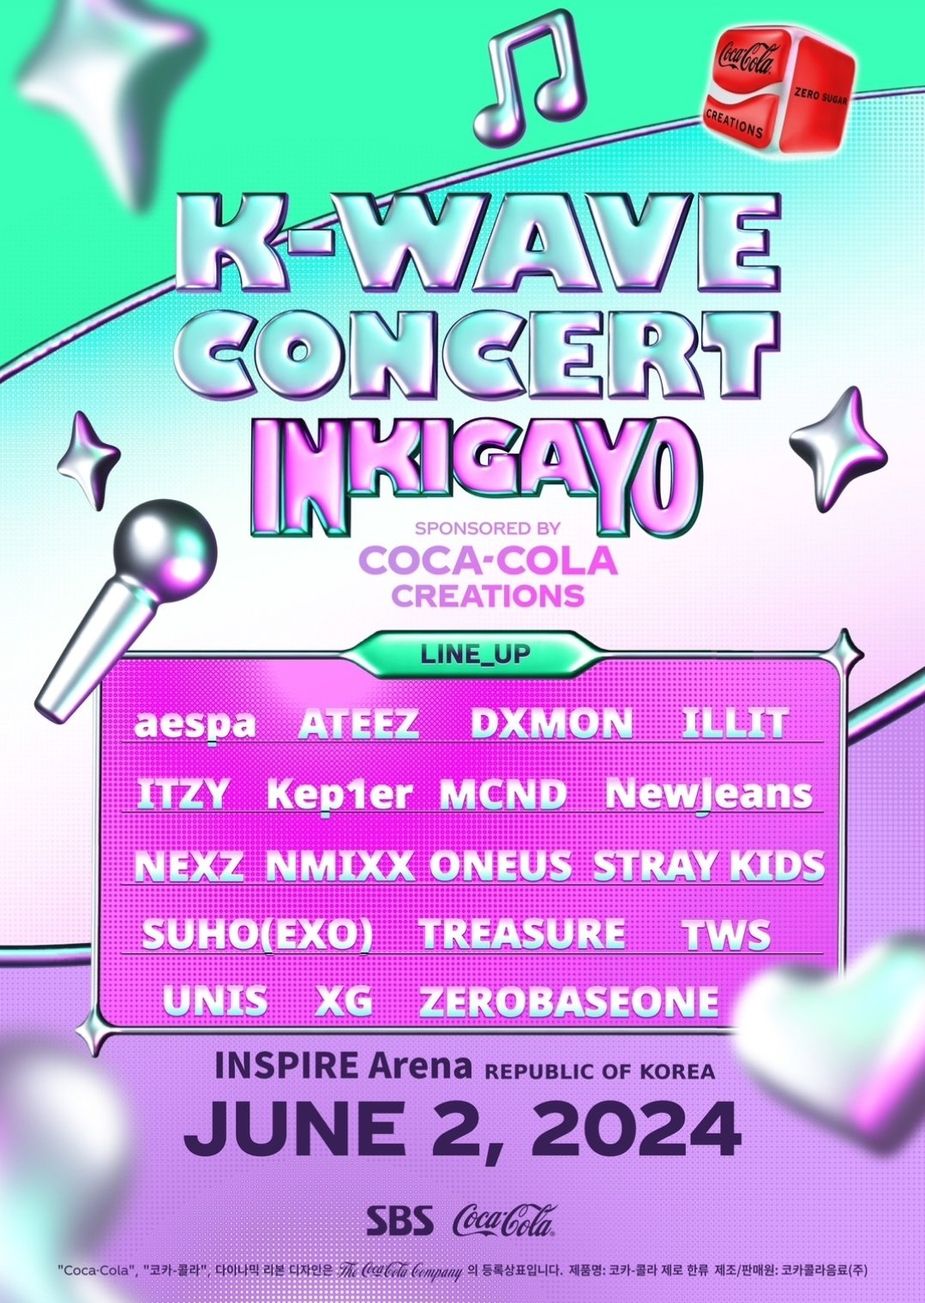 kwave